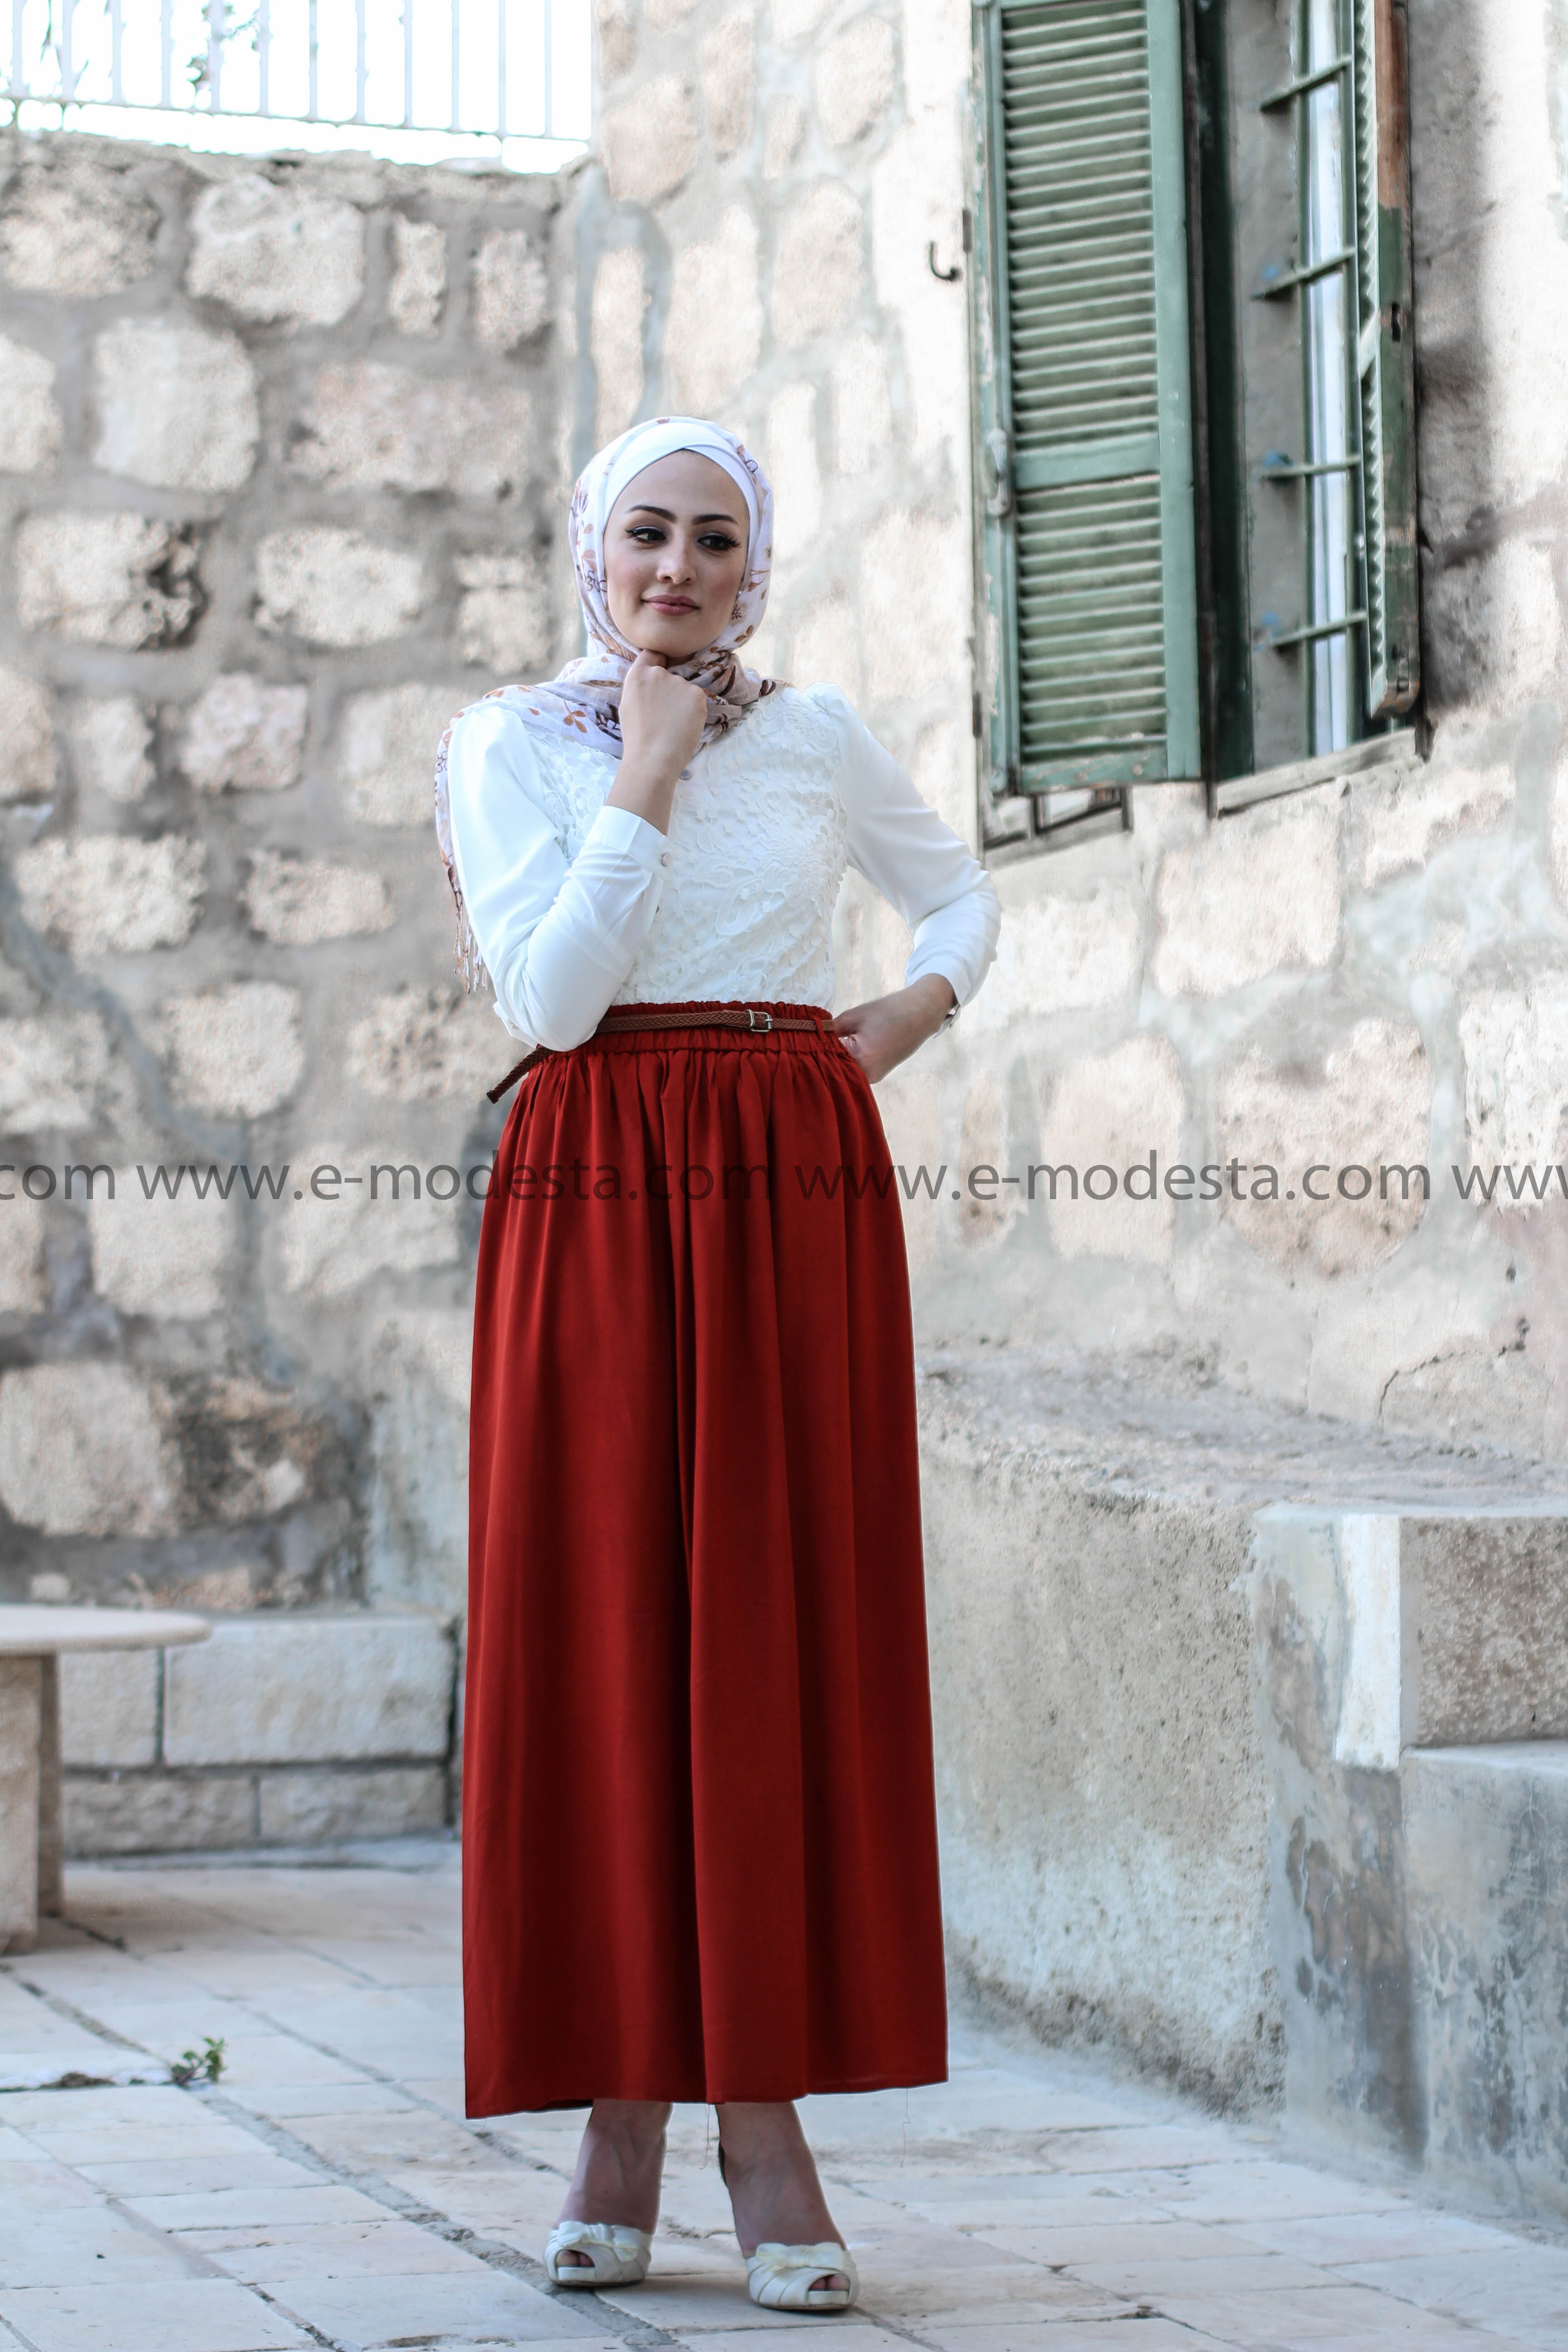 SALE Simple Casual Skirt with Belt - Brick Red - E-Modesta